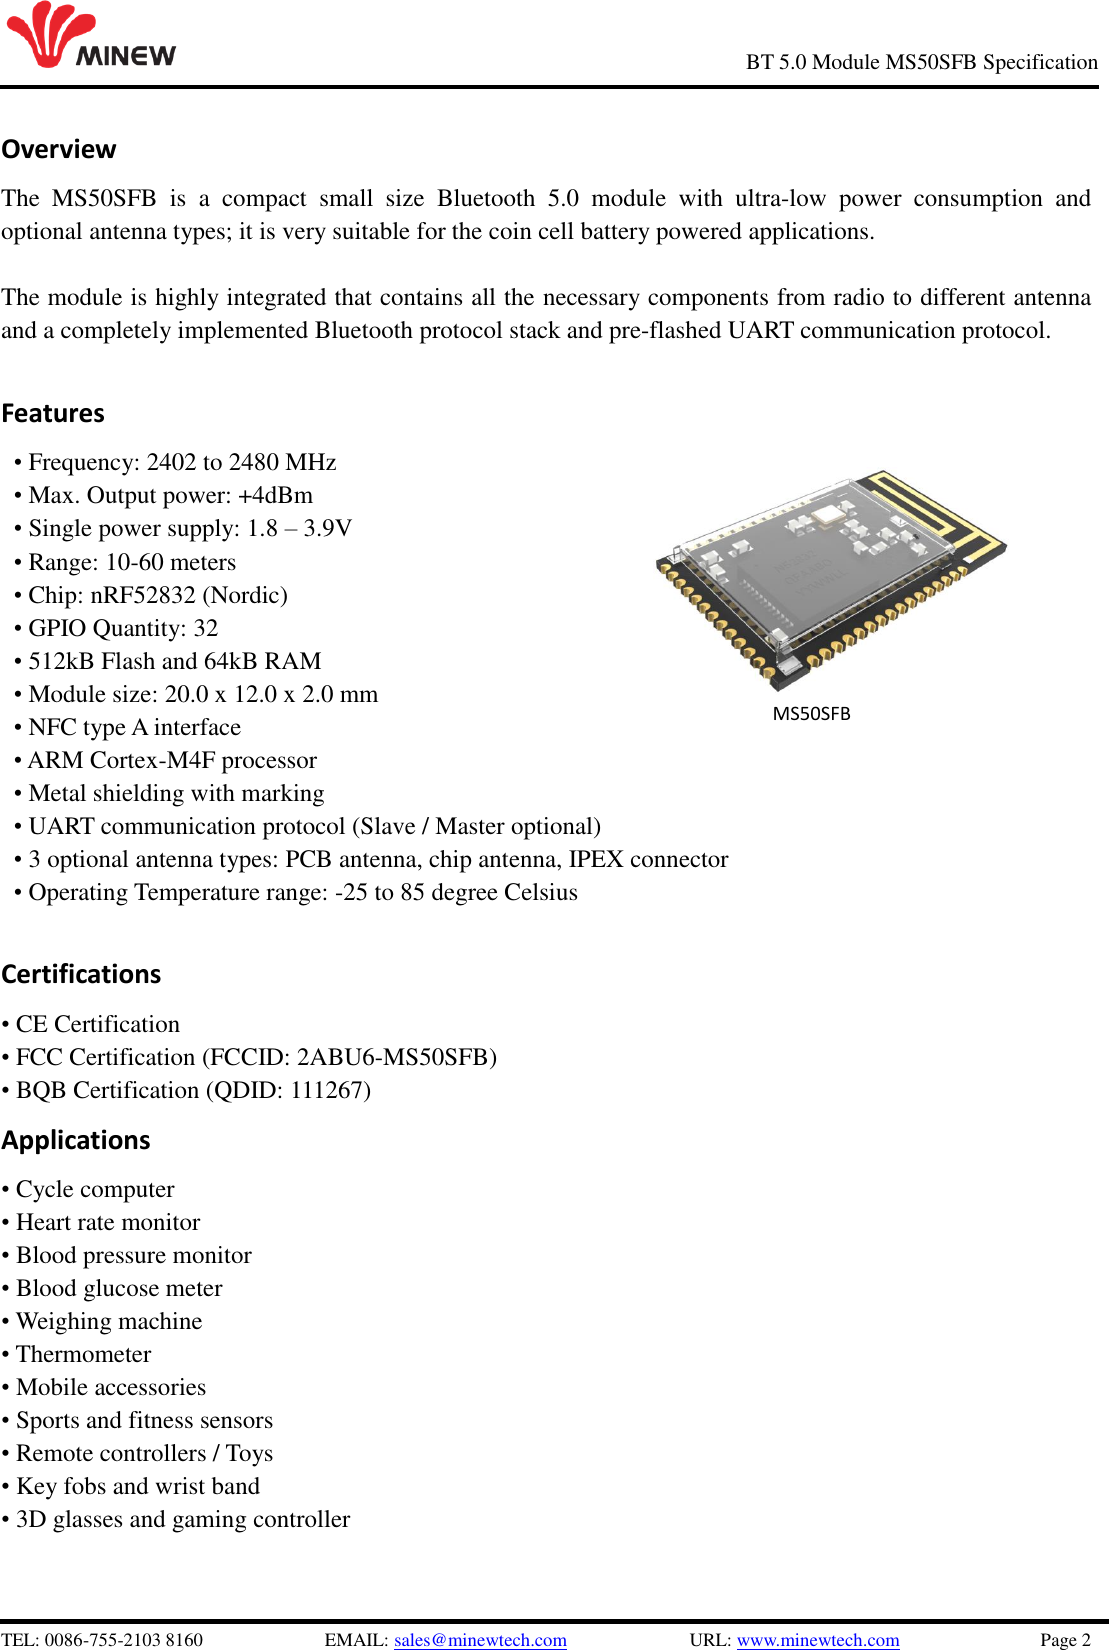   TEL: 0086-755-2103 8160                          EMAIL: sales@minewtech.com                          URL: www.minewtech.com                              Page 2                                                     BT 5.0 Module MS50SFB Specification Overview The  MS50SFB  is  a  compact  small  size  Bluetooth  5.0  module  with  ultra-low  power  consumption  and optional antenna types; it is very suitable for the coin cell battery powered applications.    The module is highly integrated that contains all the necessary components from radio to different antenna and a completely implemented Bluetooth protocol stack and pre-flashed UART communication protocol.    Features • Frequency: 2402 to 2480 MHz • Max. Output power: +4dBm   • Single power supply: 1.8 – 3.9V • Range: 10-60 meters • Chip: nRF52832 (Nordic) • GPIO Quantity: 32 • 512kB Flash and 64kB RAM • Module size: 20.0 x 12.0 x 2.0 mm • NFC type A interface • ARM Cortex-M4F processor • Metal shielding with marking • UART communication protocol (Slave / Master optional) • 3 optional antenna types: PCB antenna, chip antenna, IPEX connector • Operating Temperature range: -25 to 85 degree Celsius  Certifications • CE Certification • FCC Certification (FCCID: 2ABU6-MS50SFB) • BQB Certification (QDID: 111267) Applications • Cycle computer • Heart rate monitor • Blood pressure monitor • Blood glucose meter • Weighing machine • Thermometer • Mobile accessories • Sports and fitness sensors • Remote controllers / Toys • Key fobs and wrist band • 3D glasses and gaming controller                MS50SFB 